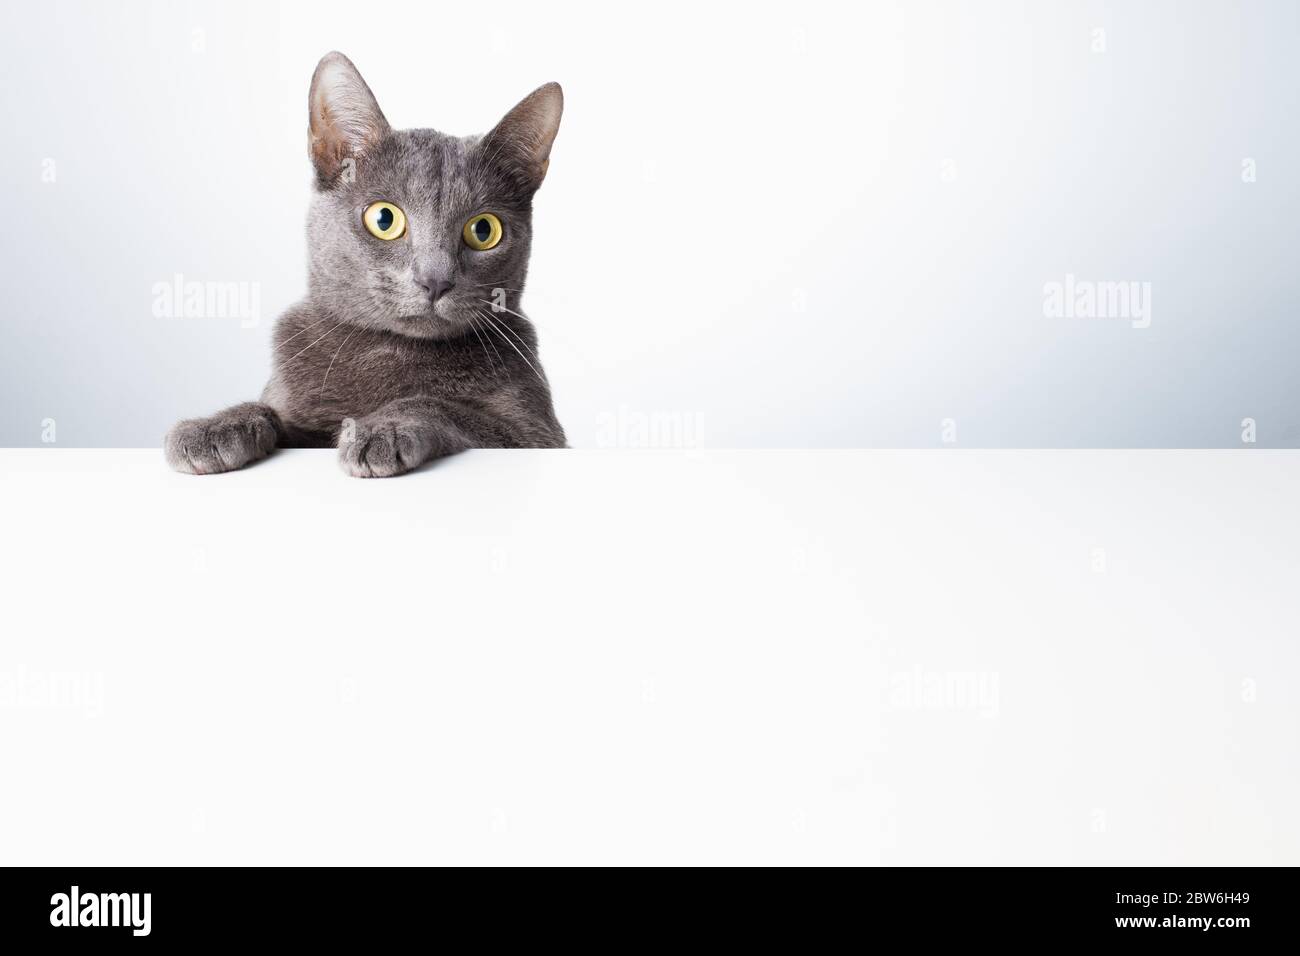 The expression and gesture of a Russian blue cat that can be used as a banner. a cat portrait. Stock Photo